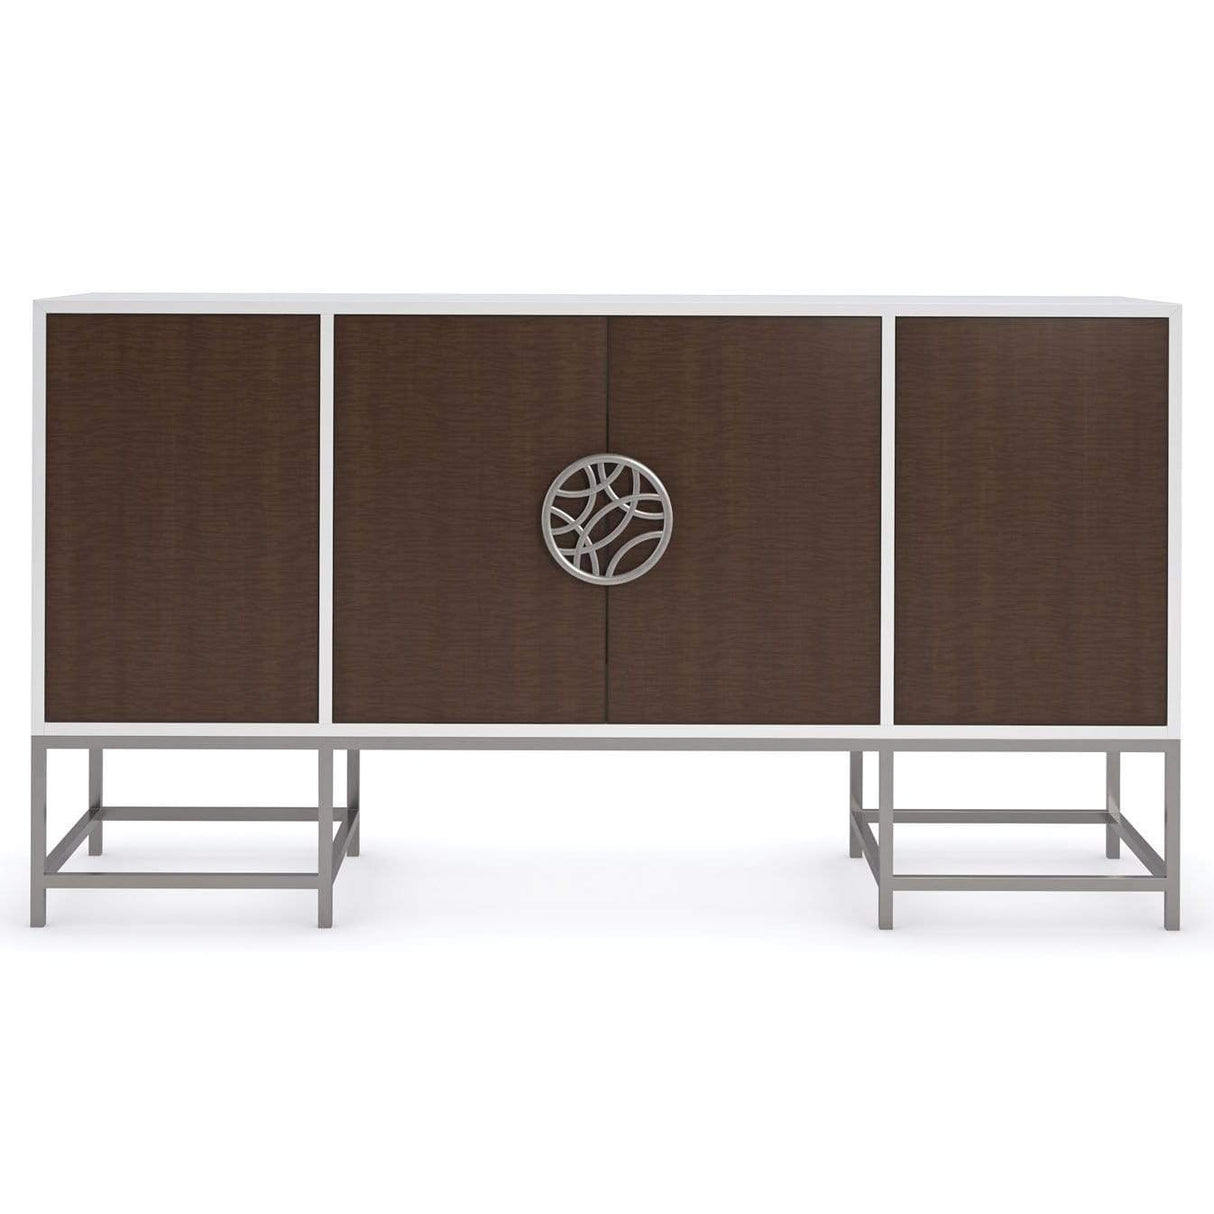 Caracole A Touch Of Class Buffet Furniture caracole-CLA-421-682 662896038057